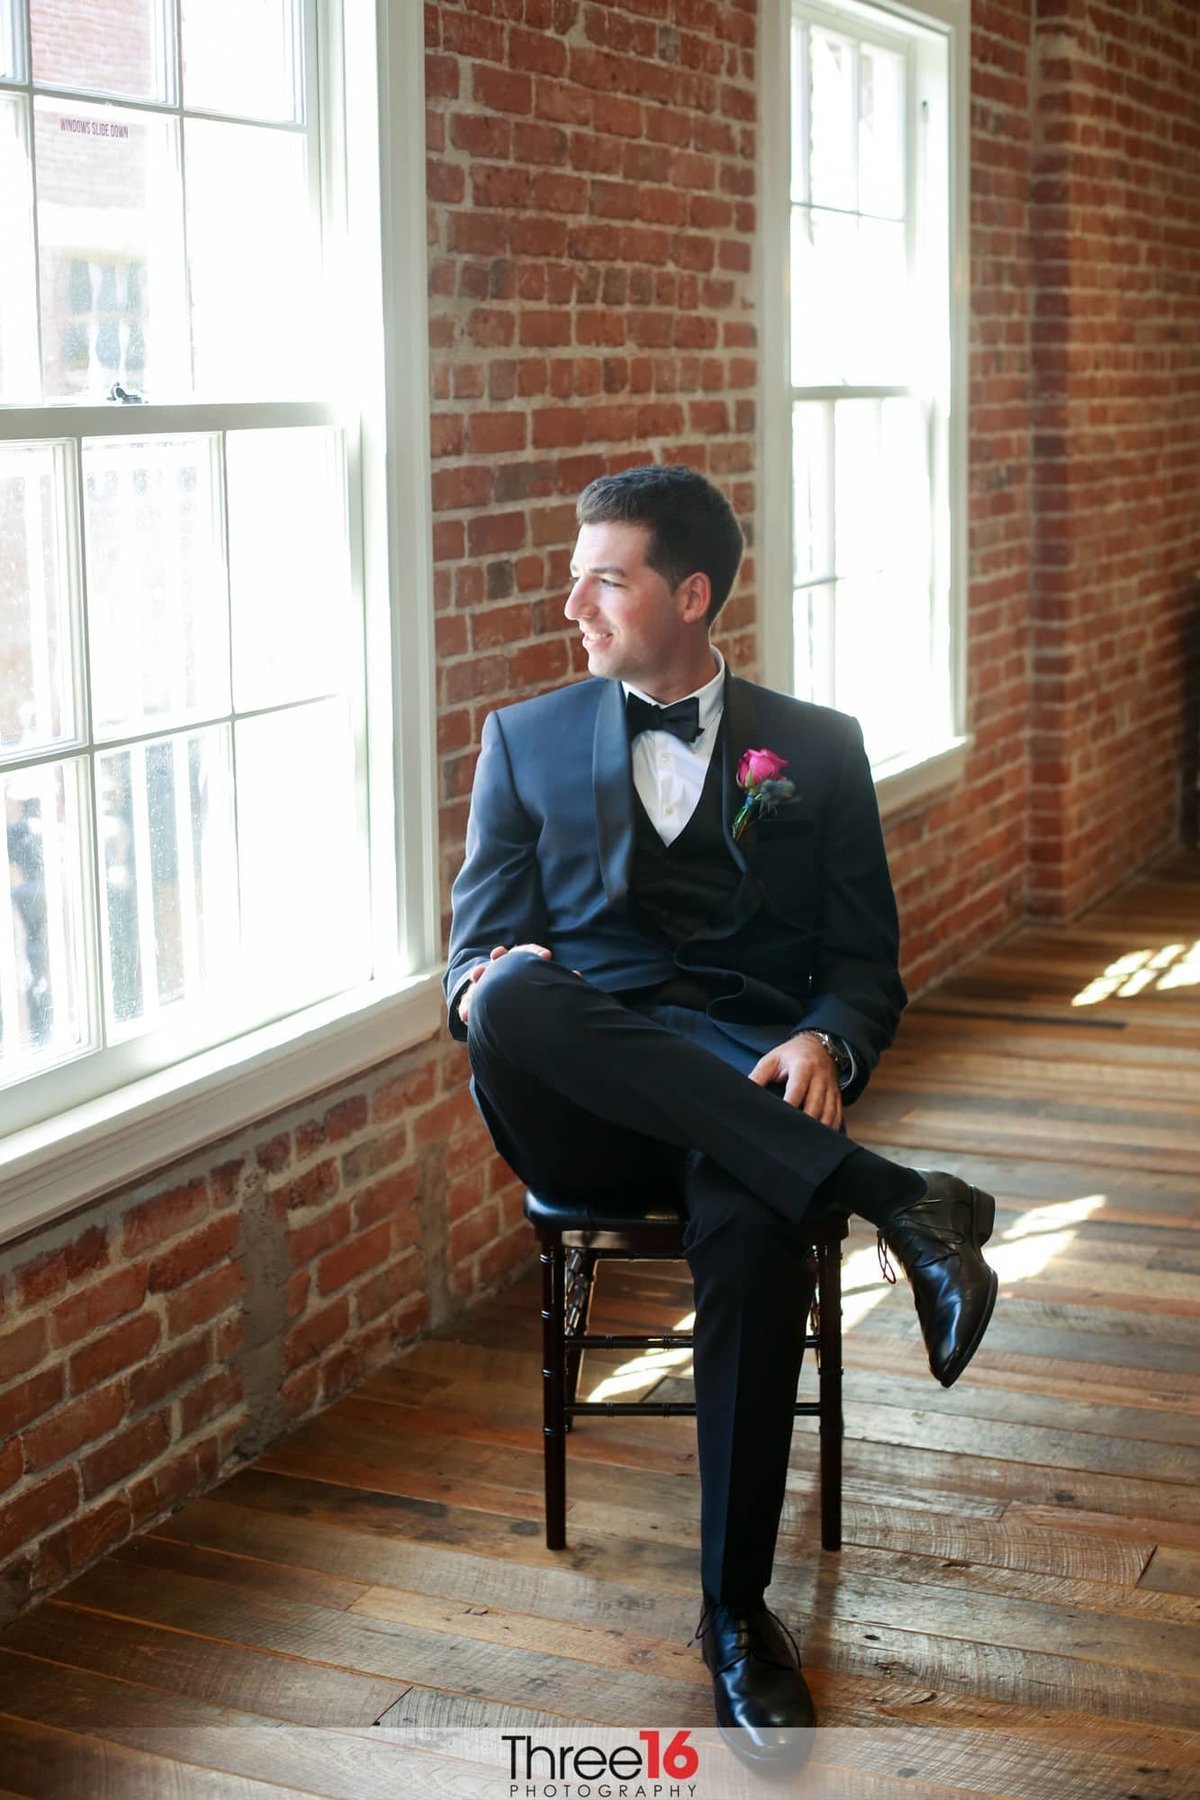 Groom sitting in a chair looking out the window prior to the ceremony